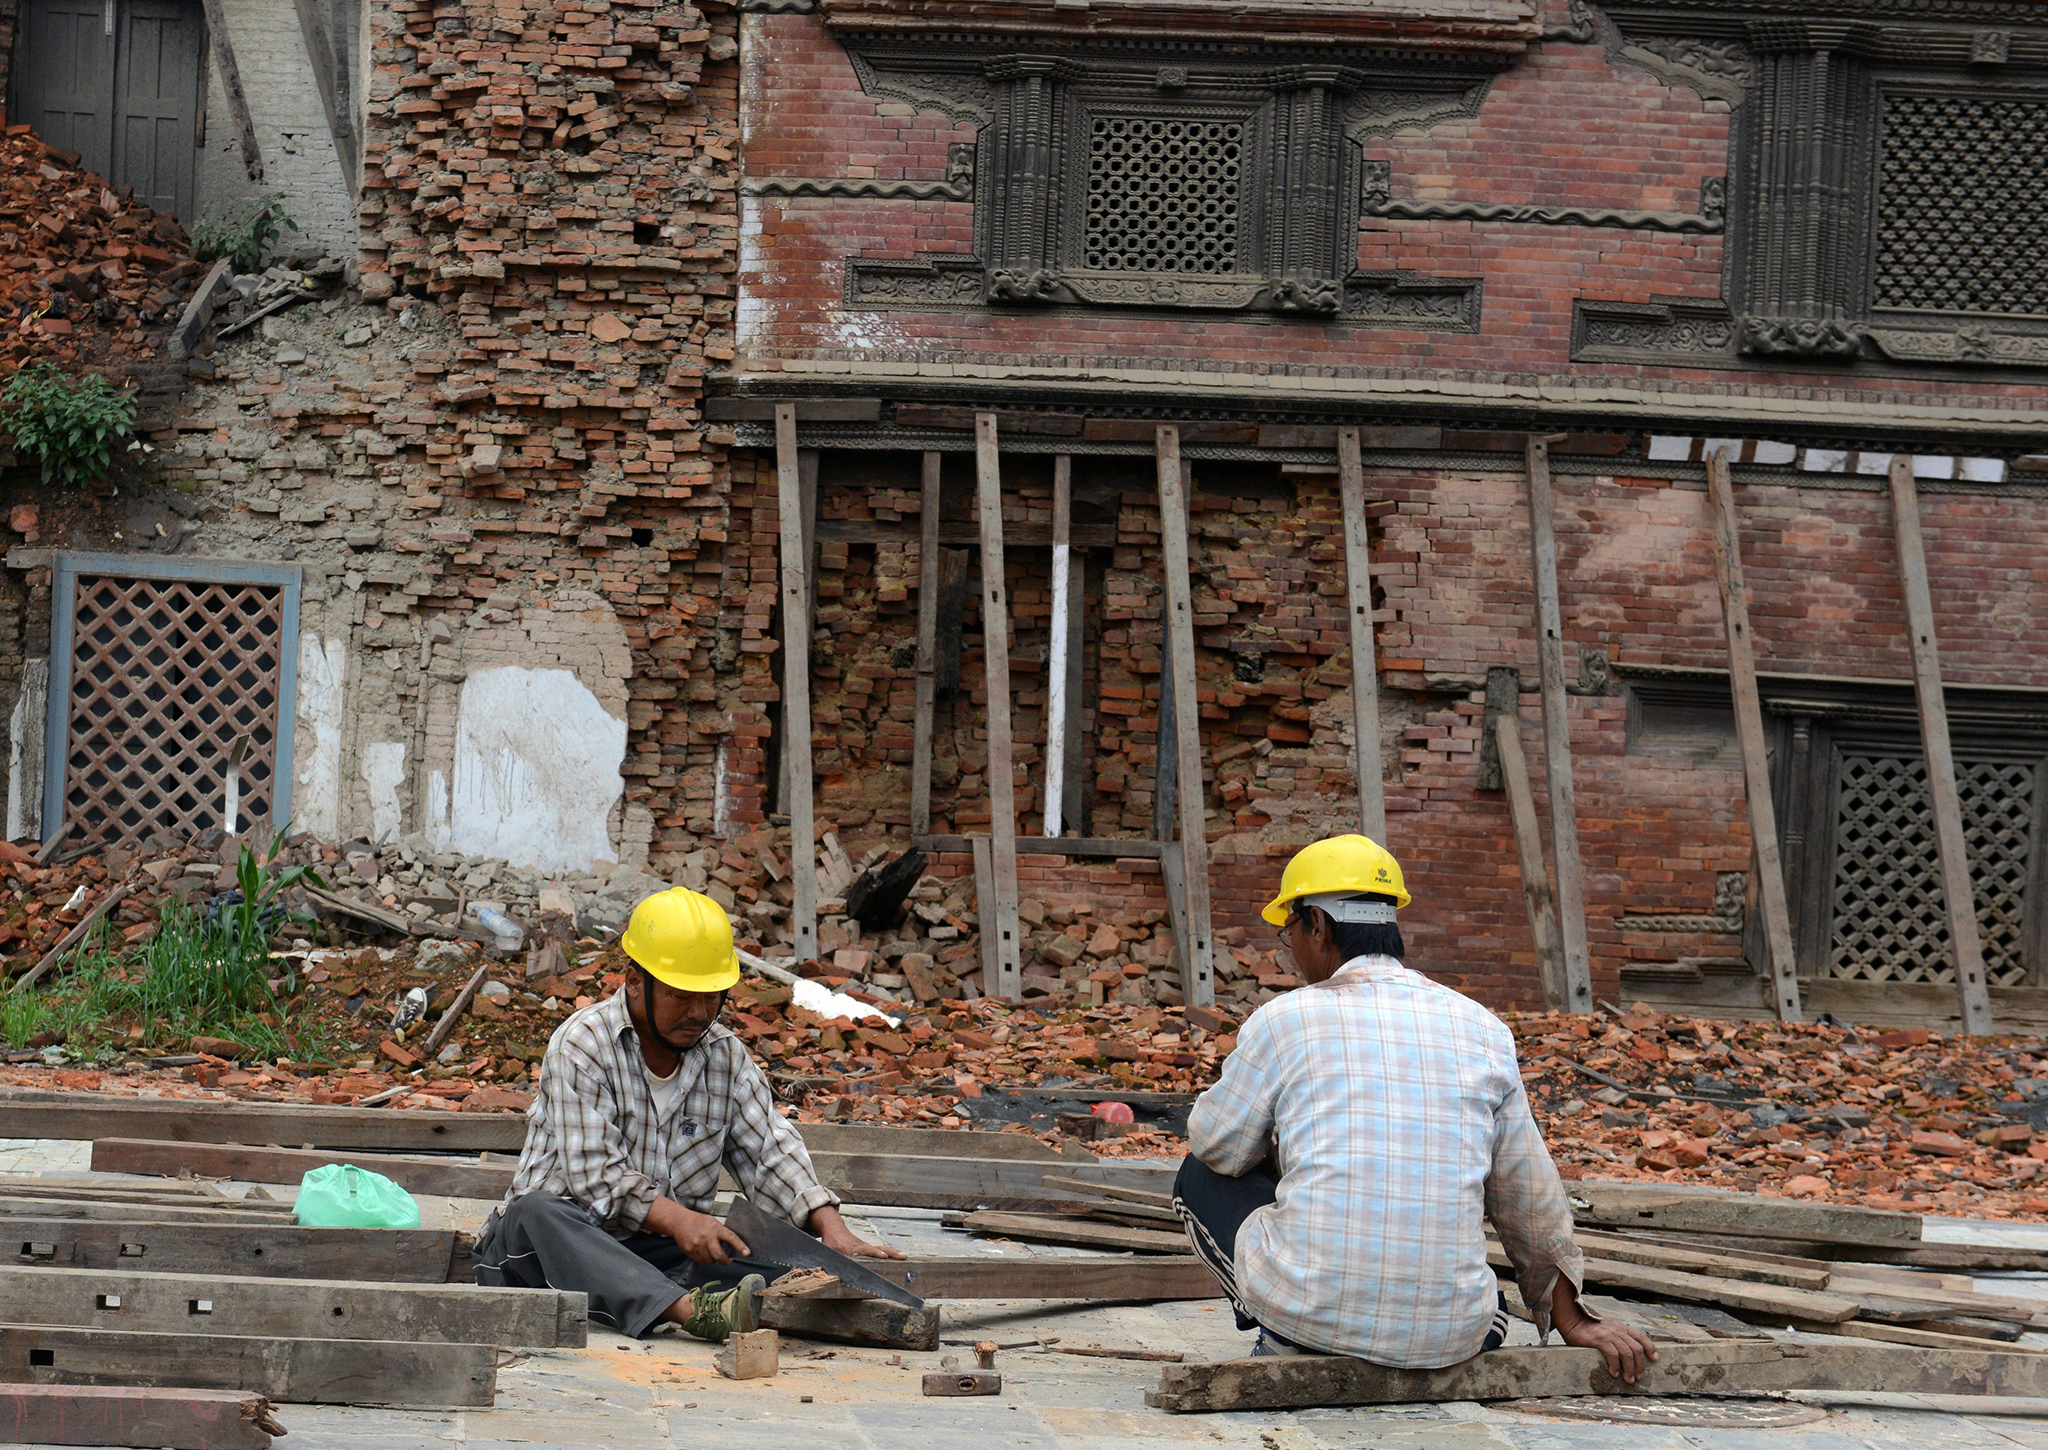 Workers renovate heritage sites in Basantapur Durbar Square in Kathmandu on July 21, 2015 that were destroyed by earthquakes in April and May